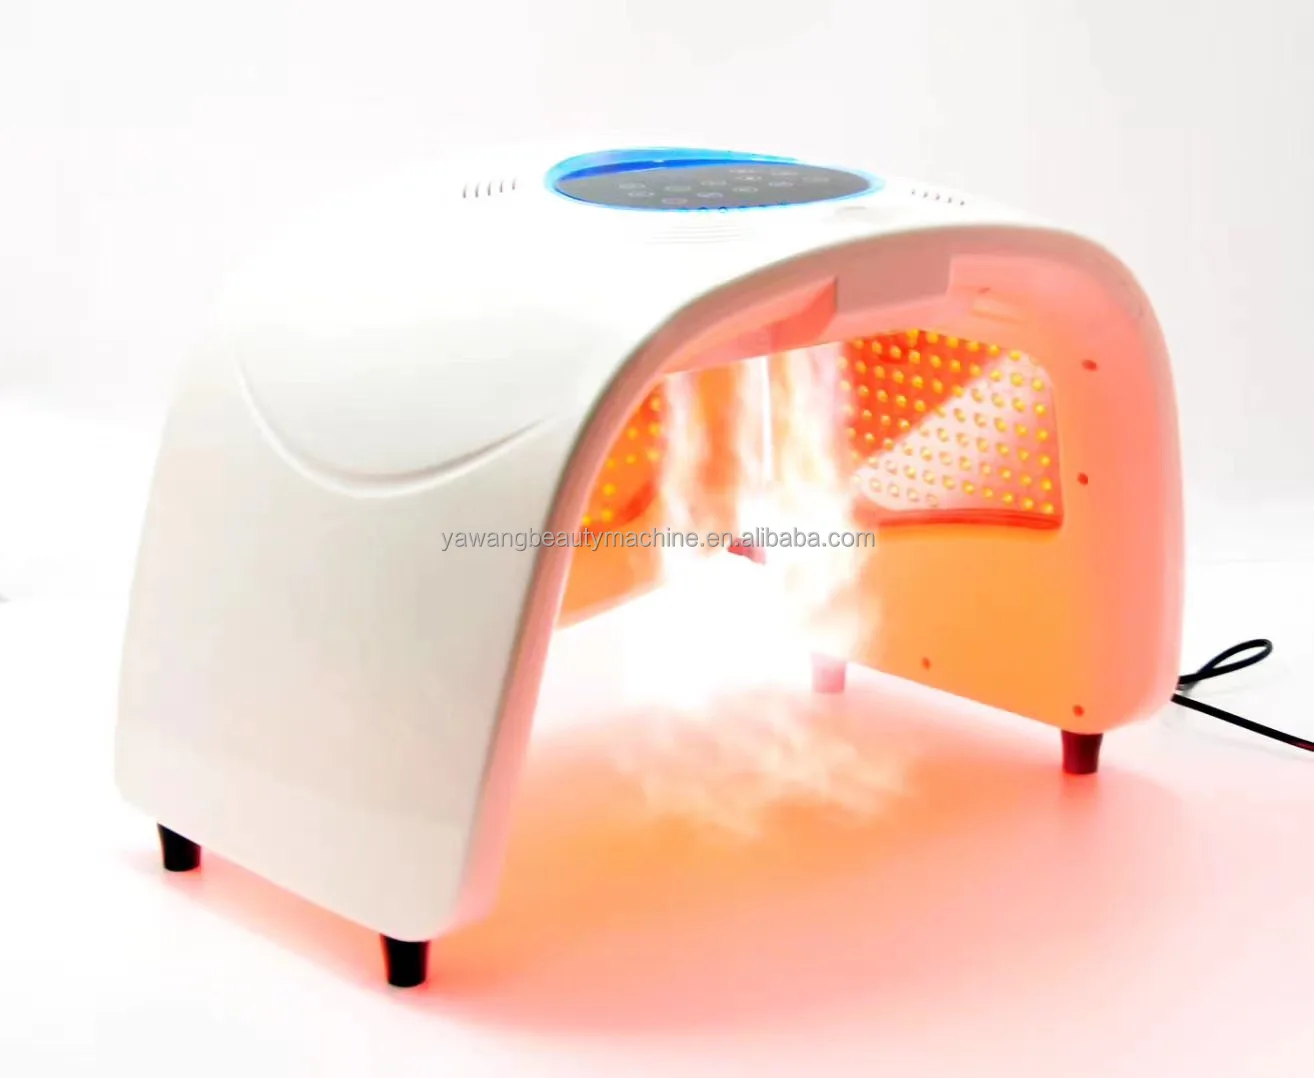 

Pdt Facial Bio-light Photon Infrared Red Light Therapy Lamp Panel Beauty Device Machine For Anti Aging face led